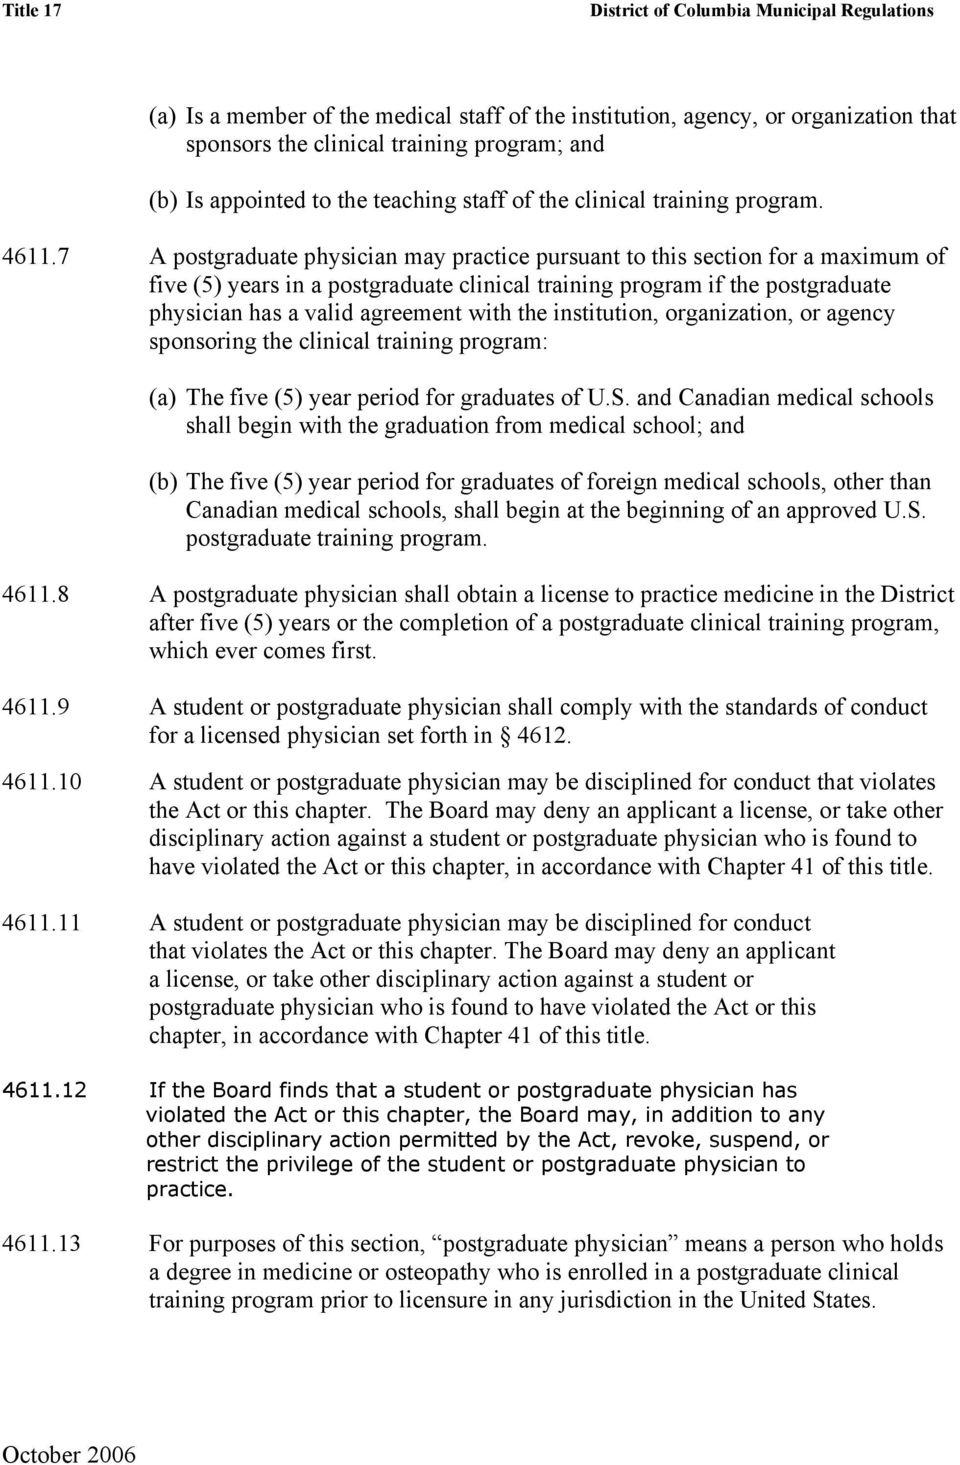 7 A postgraduate physician may practice pursuant to this section for a maximum of five (5) years in a postgraduate clinical training program if the postgraduate physician has a valid agreement with